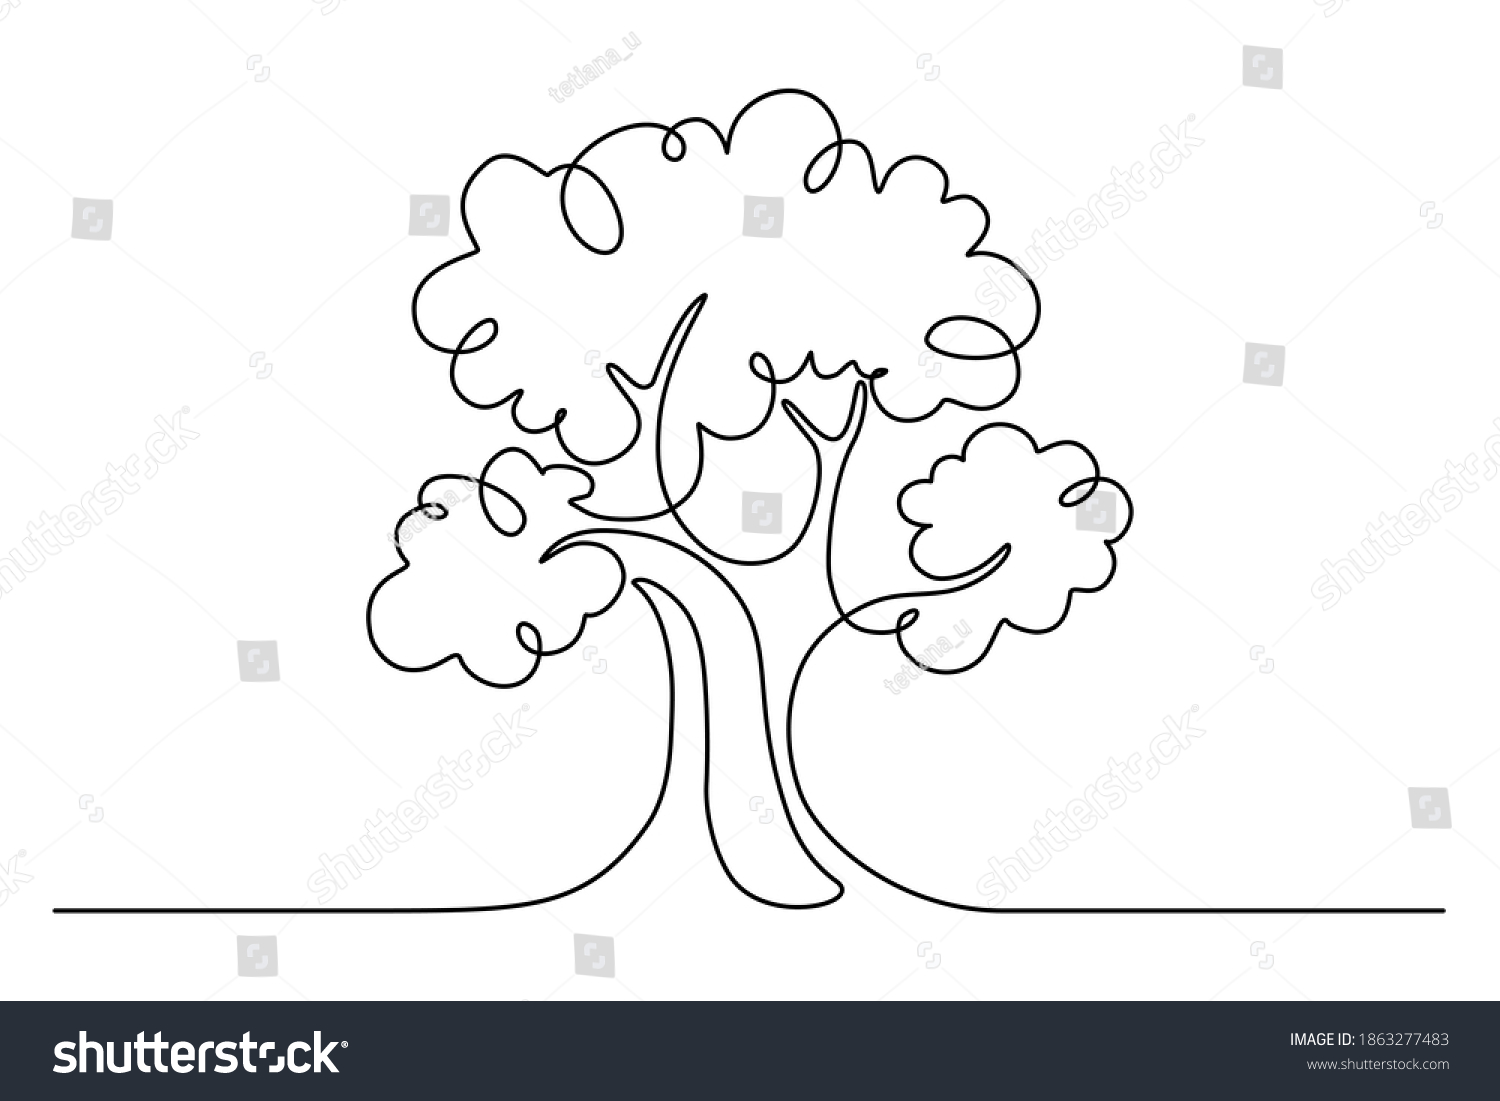 SVG of Tree in continuous line art drawing style. Giant and powerful tree black linear design isolated on white background. Vector illustration svg